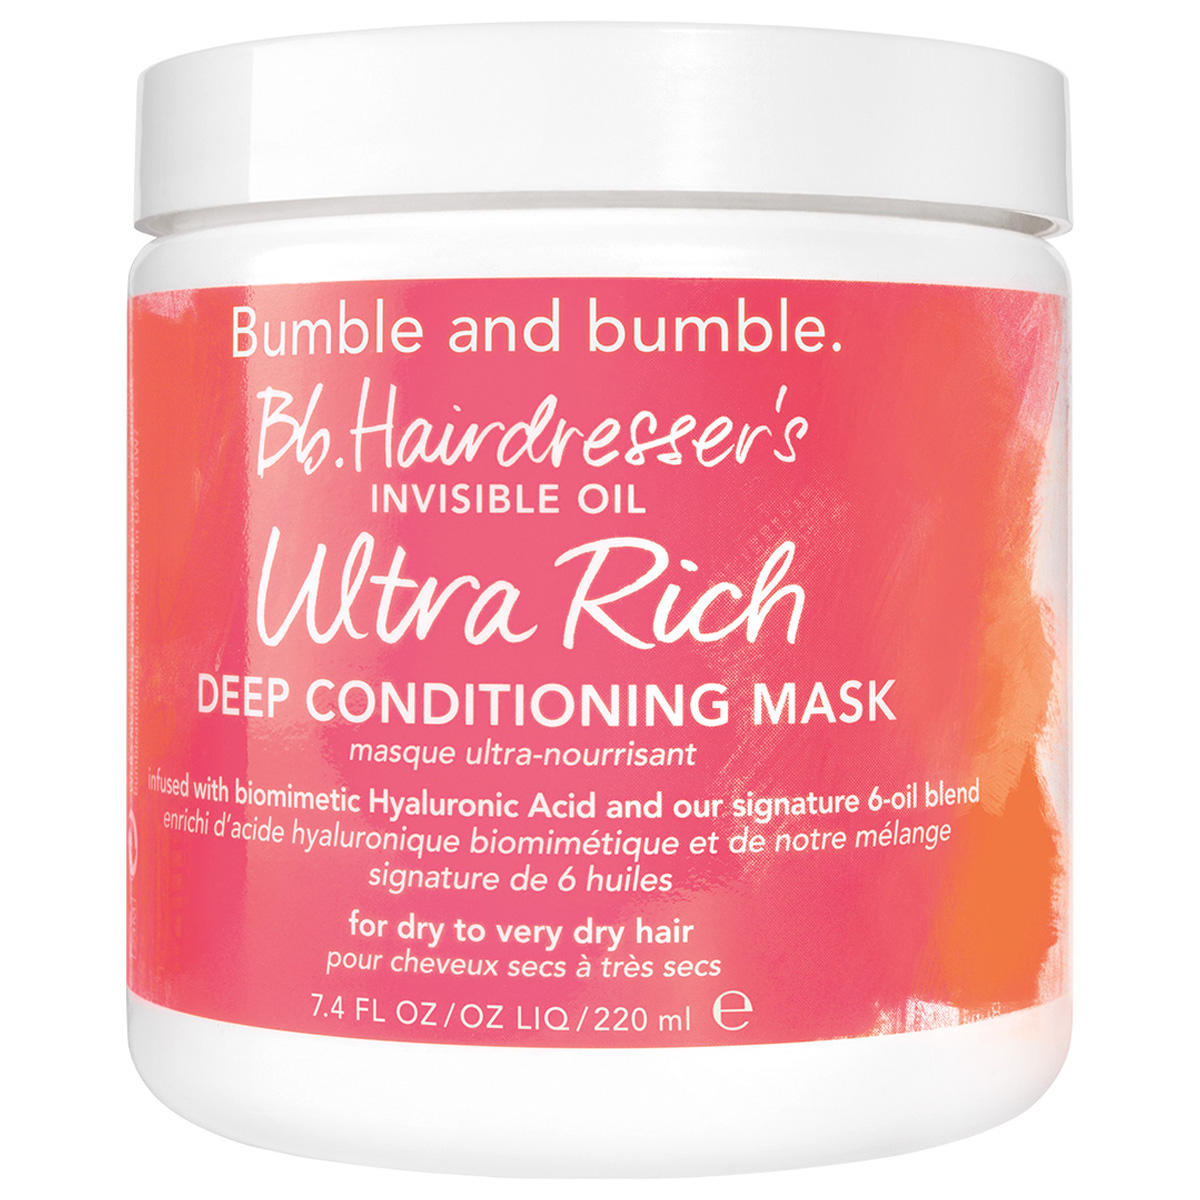 Bumble and bumble HIO  Ultra Rich Deep Conditioning Mask 220 ml - 1